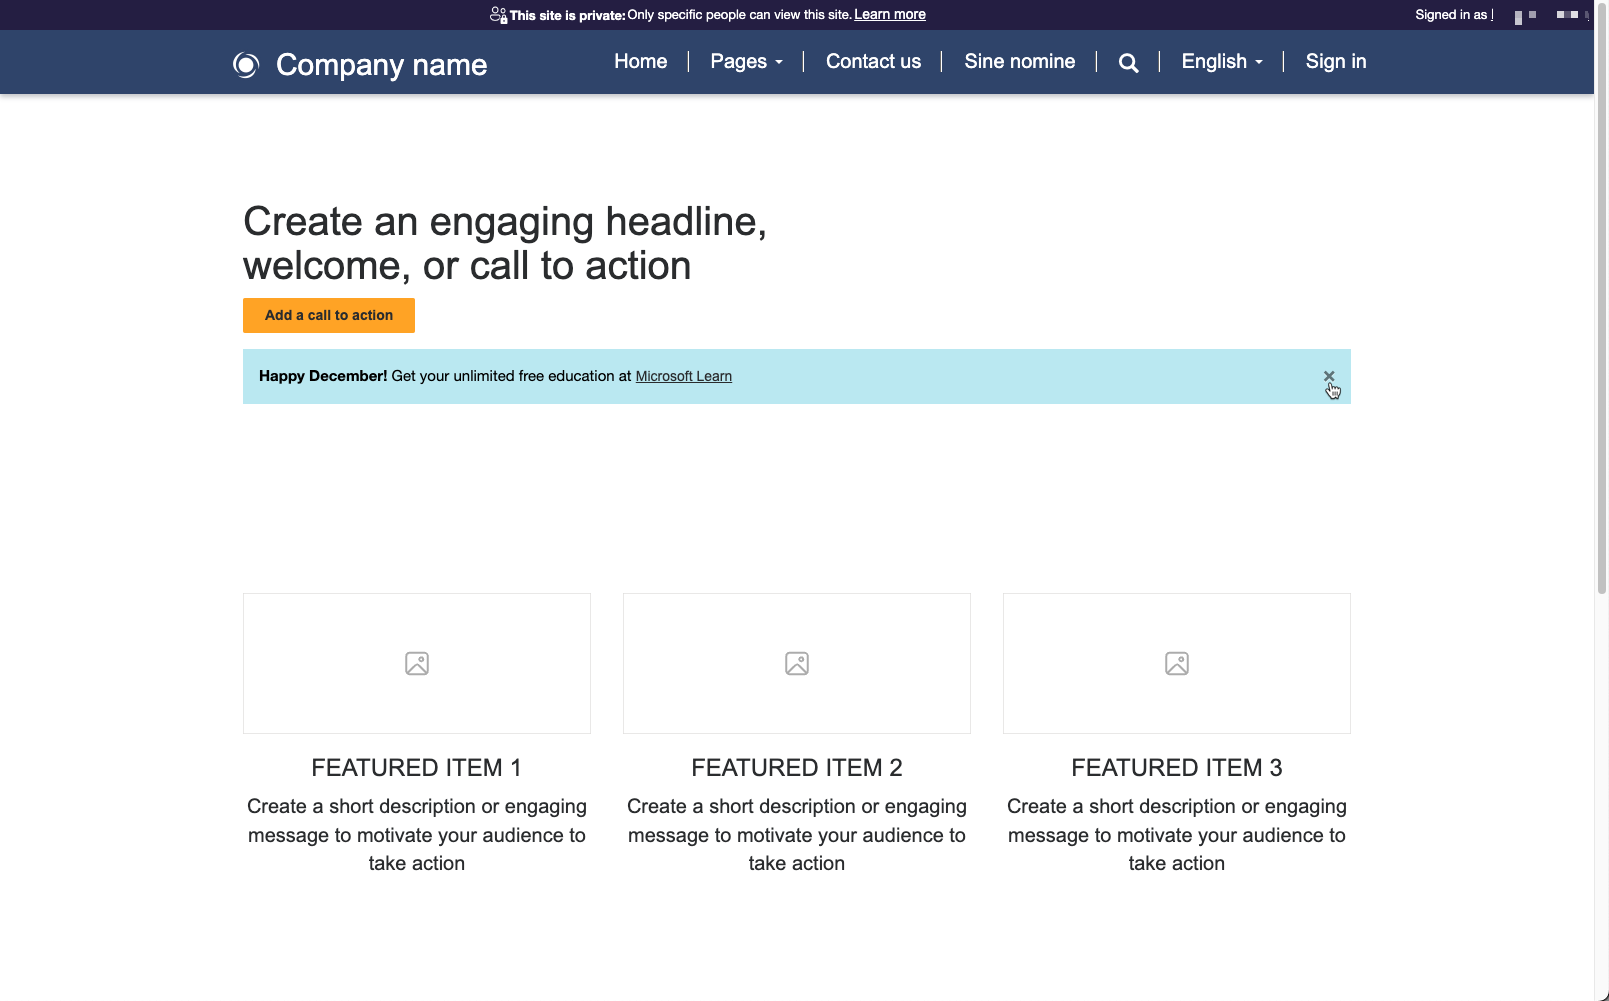 Screenshot of a Power Pages page rendering miscellaneous bootstrap content.